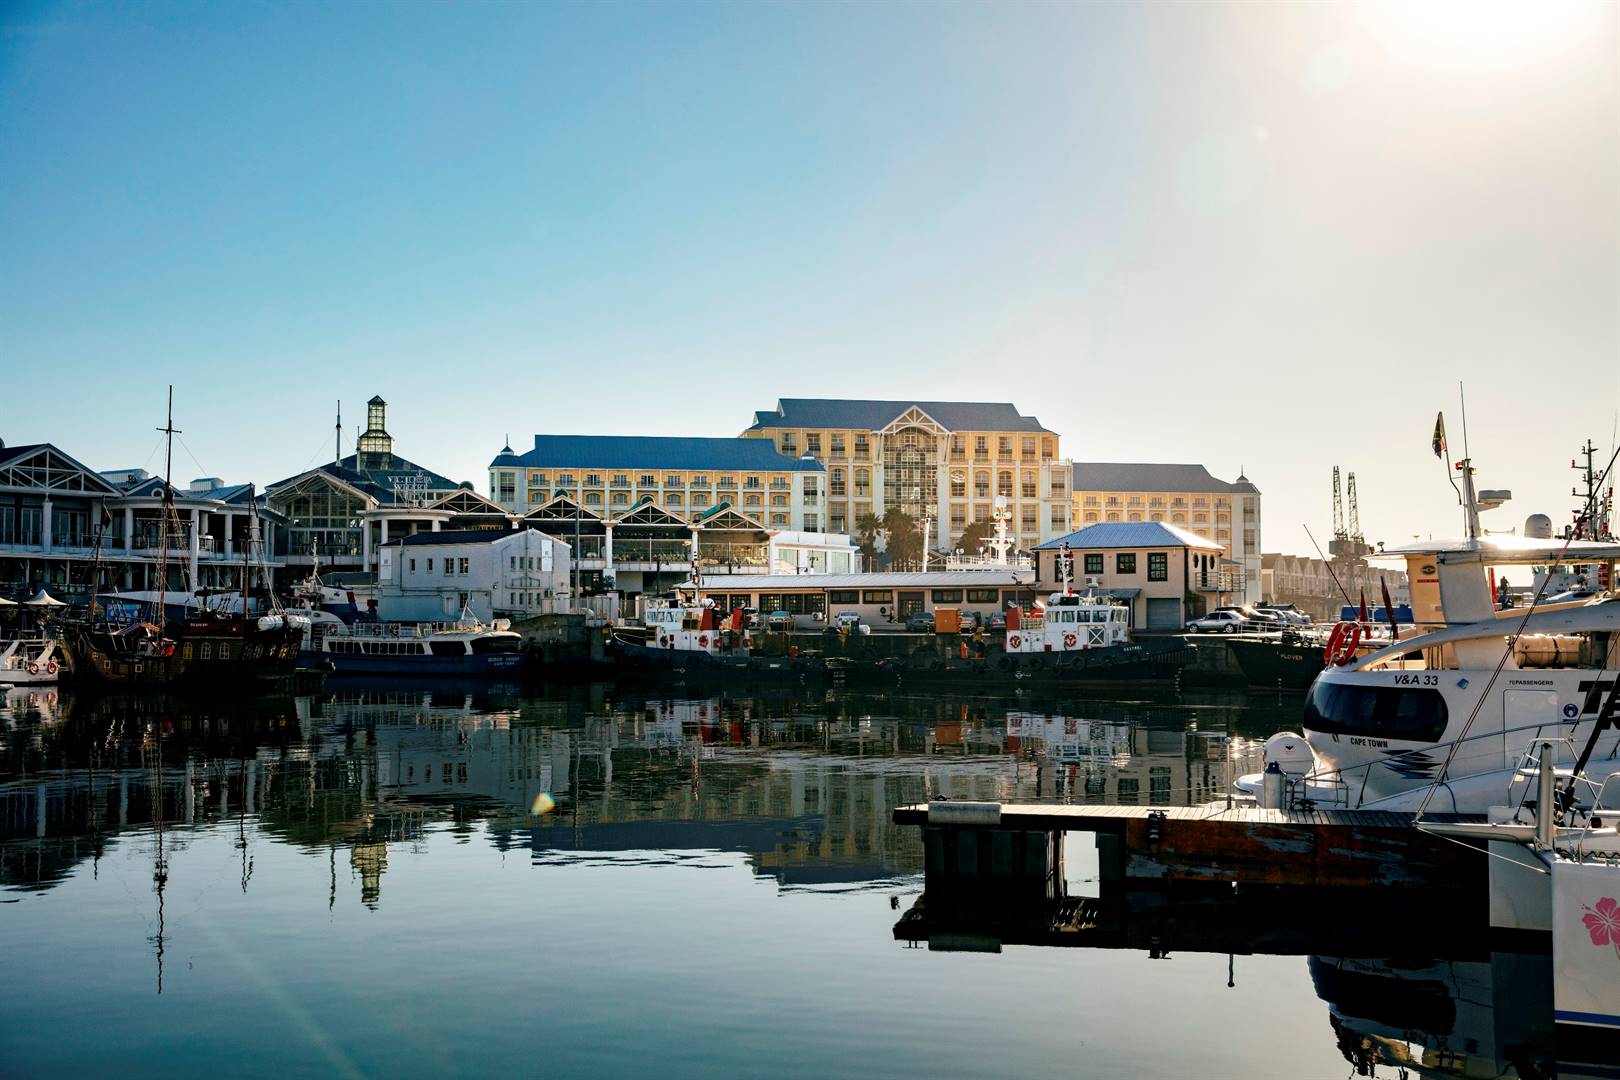 News24 | V&A Waterfront booms as Growthpoint sees signs of SA turnaround